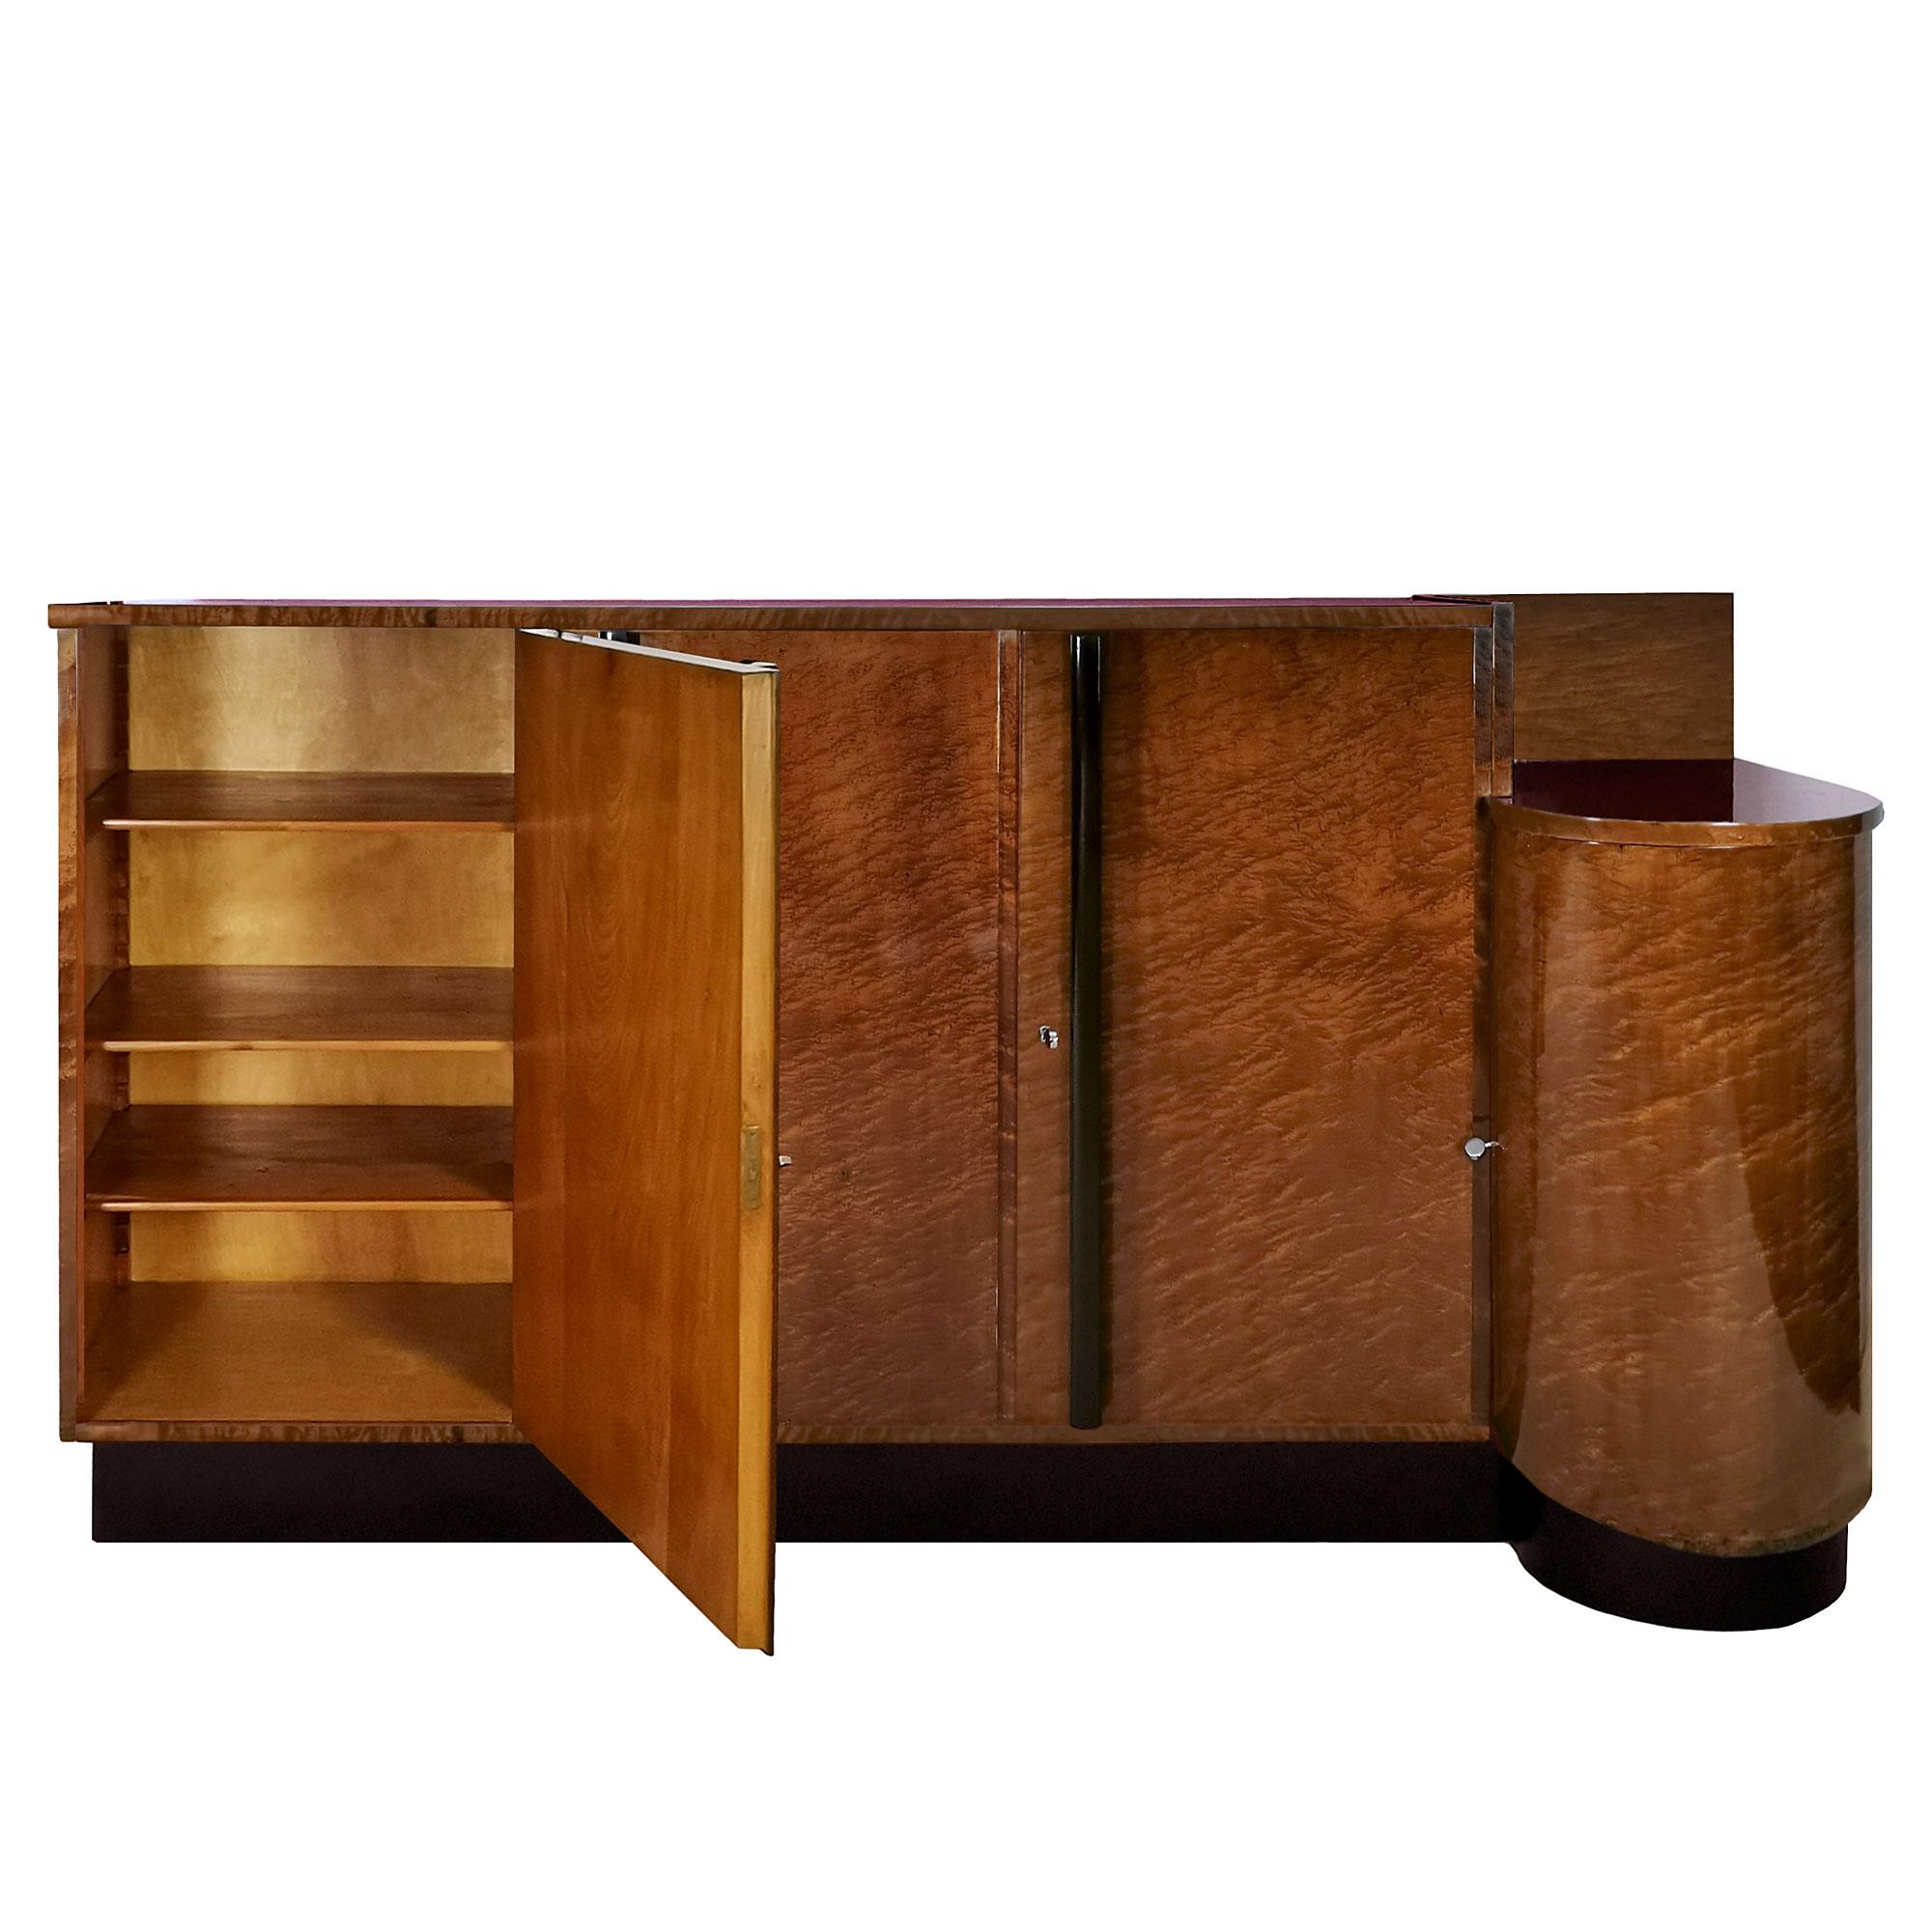 Polished Large Art Deco Sideboard Cabinet in Speckled Mahogany – Italy 1930 For Sale